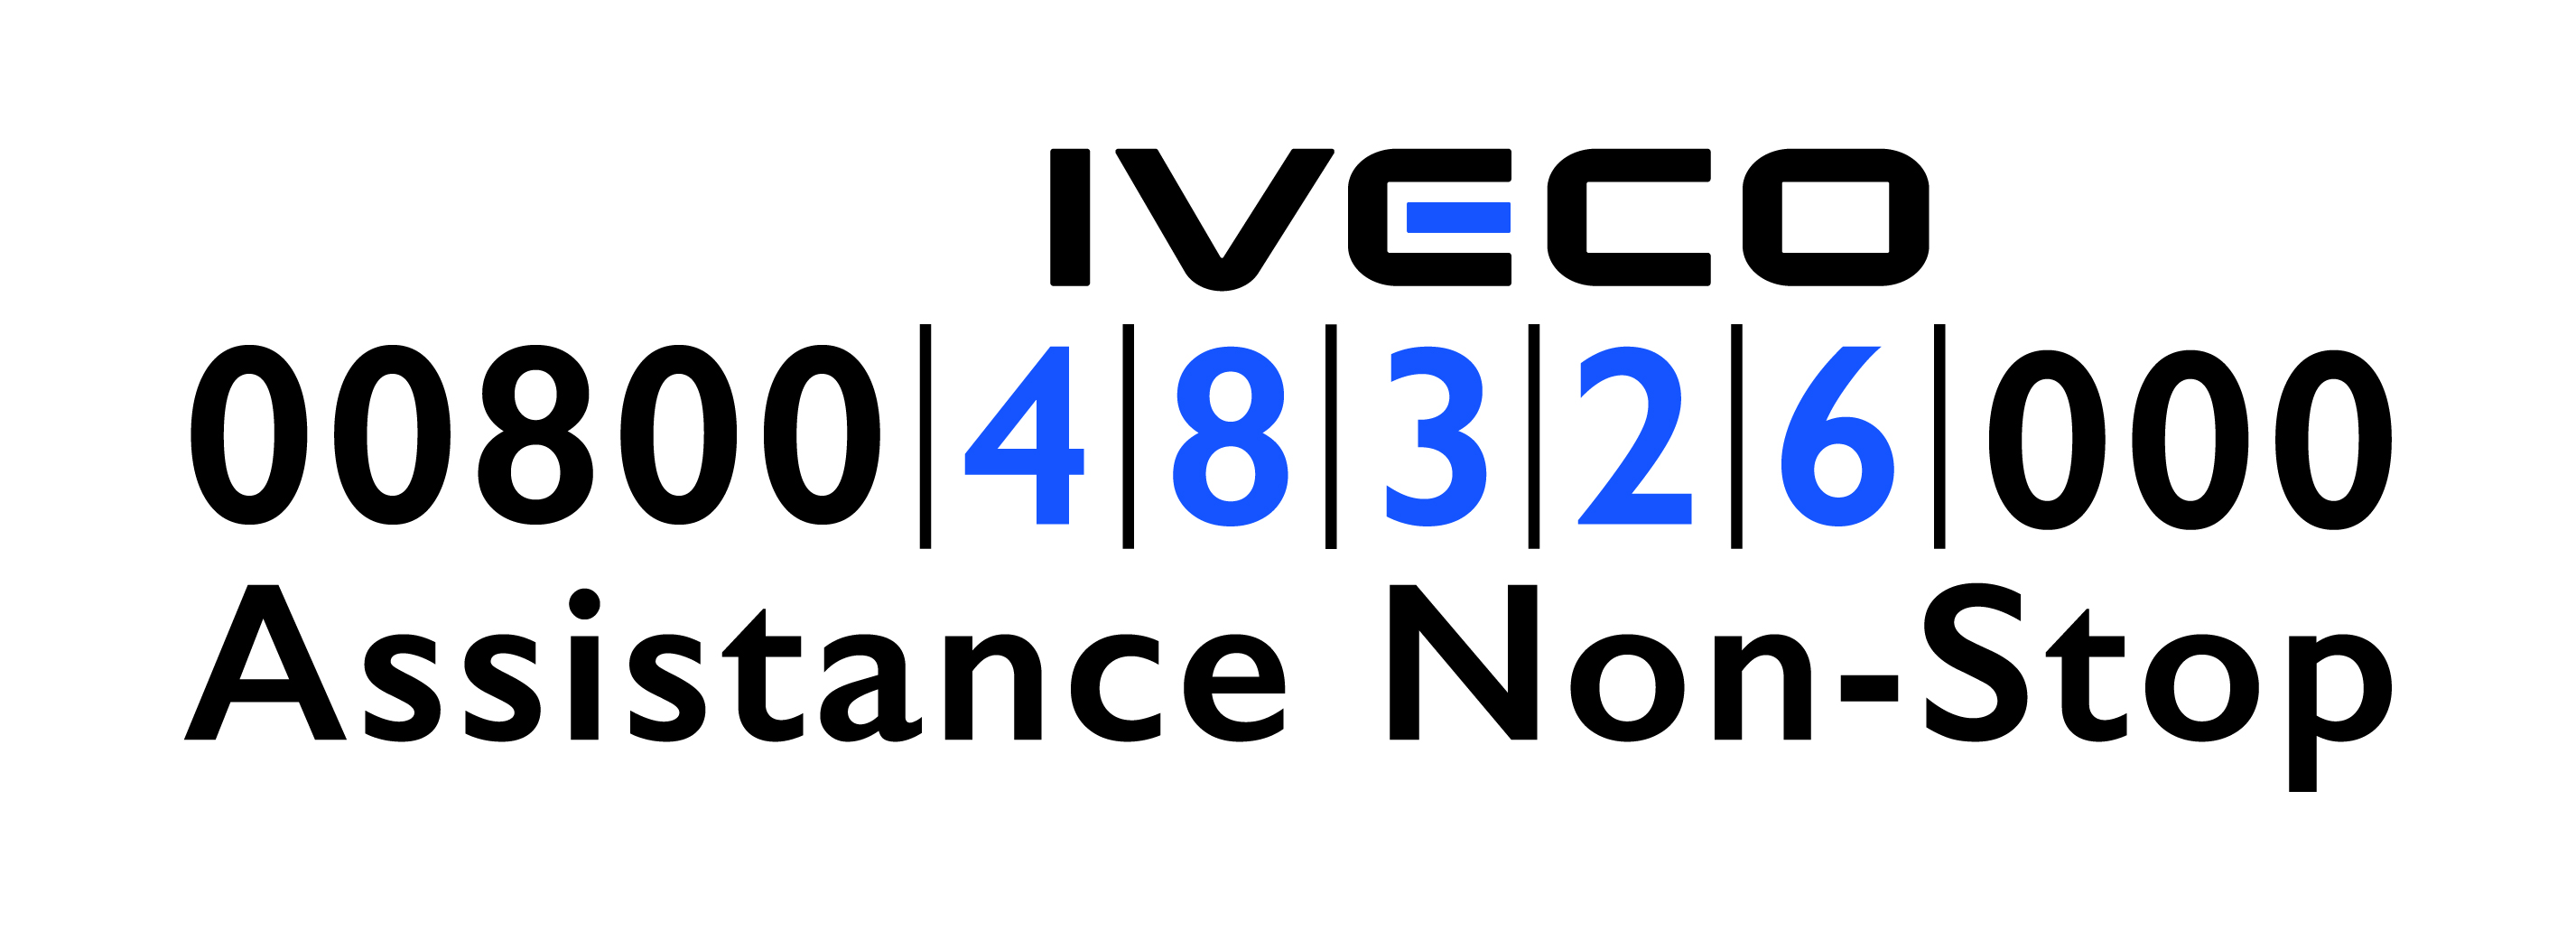 iveco assistance non stop